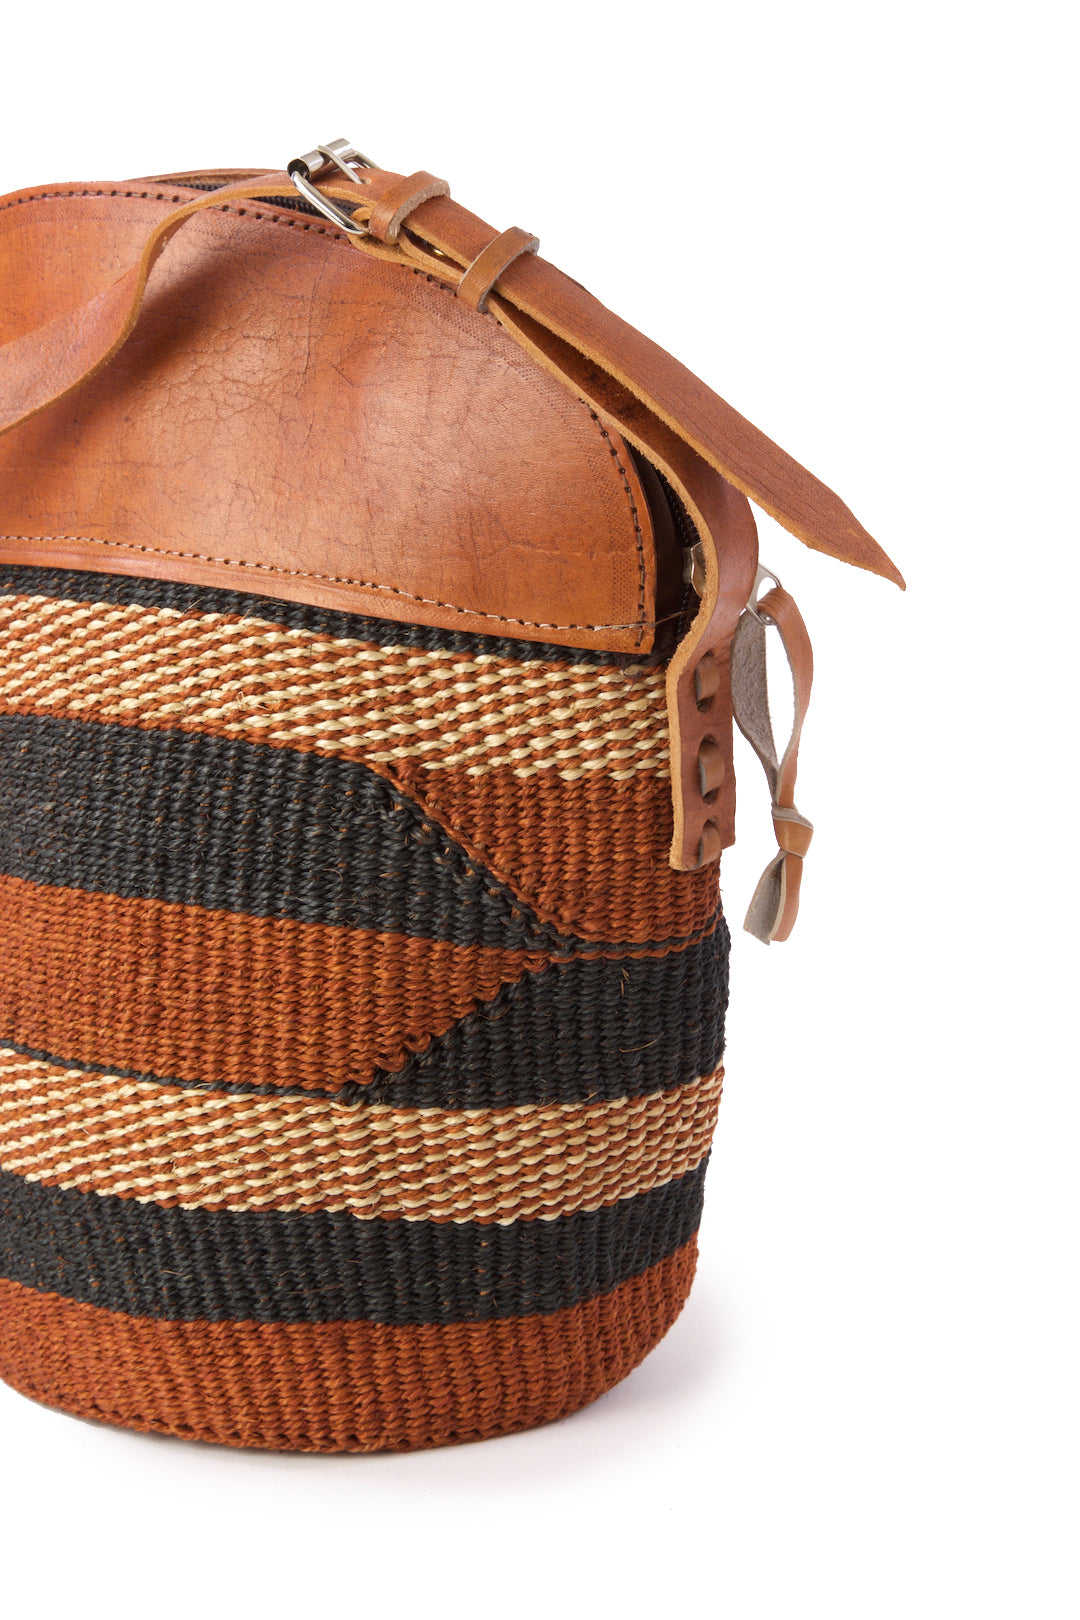 Woven Sisal and Leather Tote